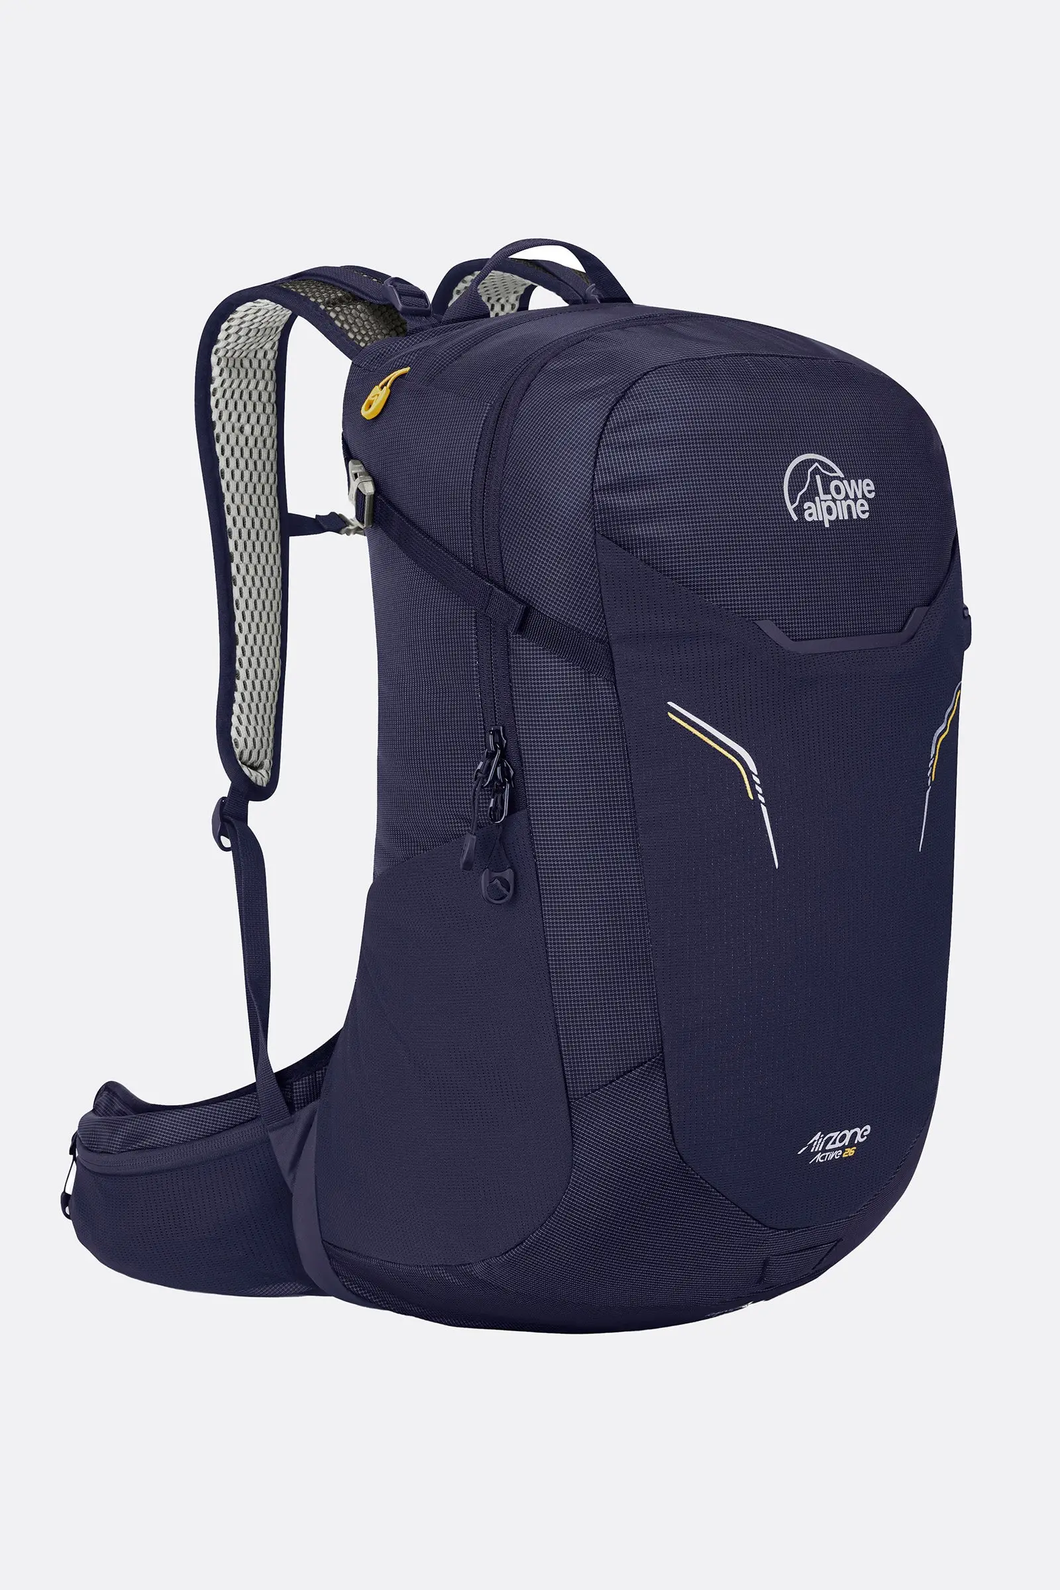 Lowe Alpine Airzone Active 26L Daysack (Navy)(One Size)